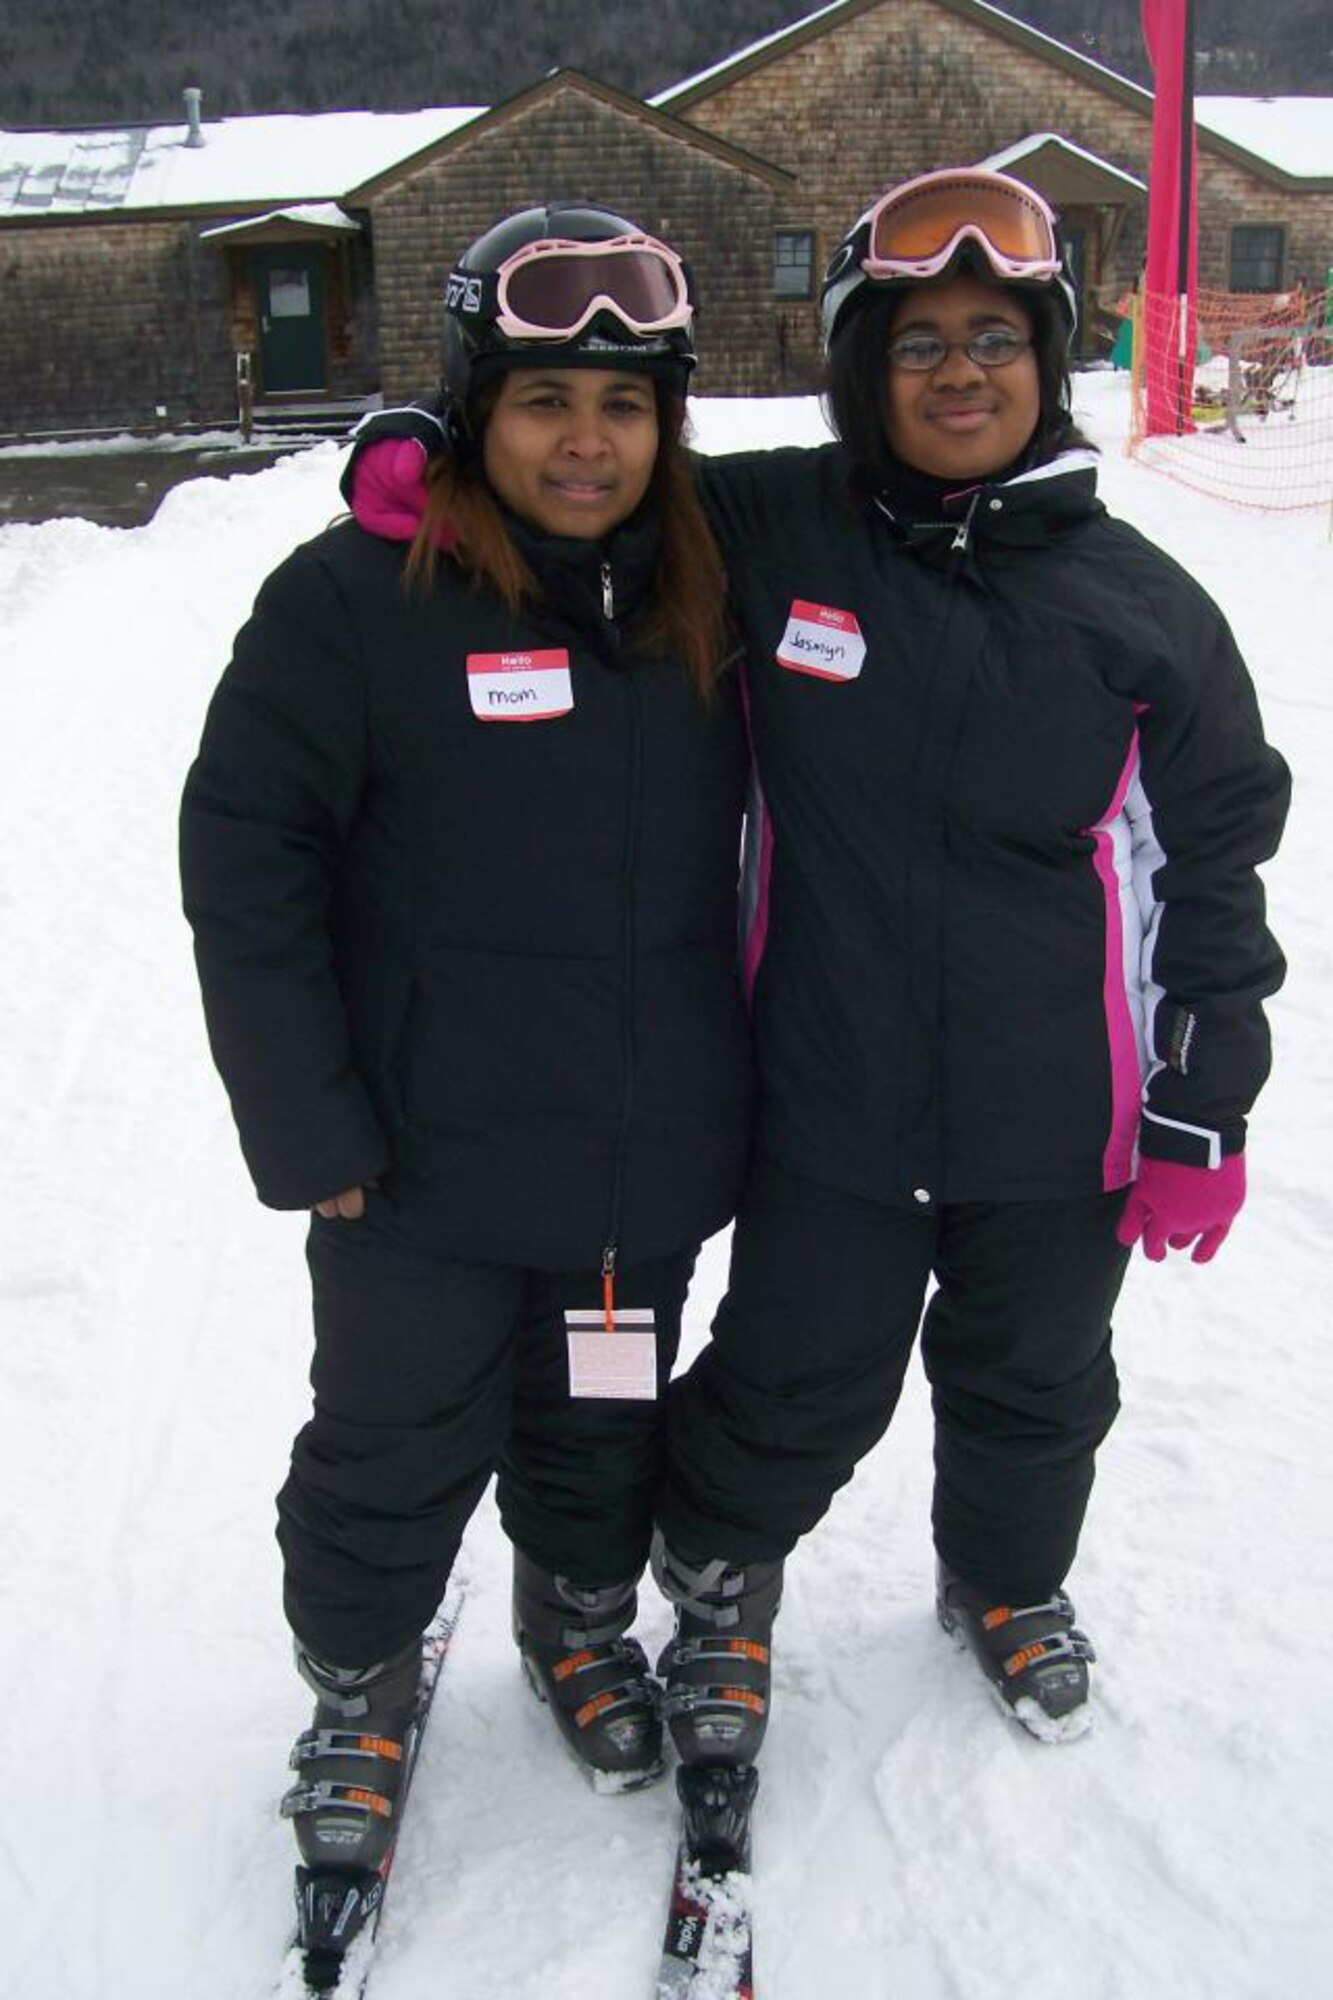 Air Force Reservist Tech. Sgt. Francine Torres (left) and her visually impaired 17-year-old daughter, Jasmine Polite (right), attended a free military-sponsored mountain adventure camp for military teens with physical disabilities in New Hampshire. Along with a dozen other kids from across the U.S., The Torres duo enjoyed many winter activities and adventures they normally wouldn't do to include dog sledding, snow tubing, ice skating and downhill skiing. Torres is an knowledge operations manager with the 920th Rescue Wing, Patrick Air Force Base, Fla. (Courtesy photo)